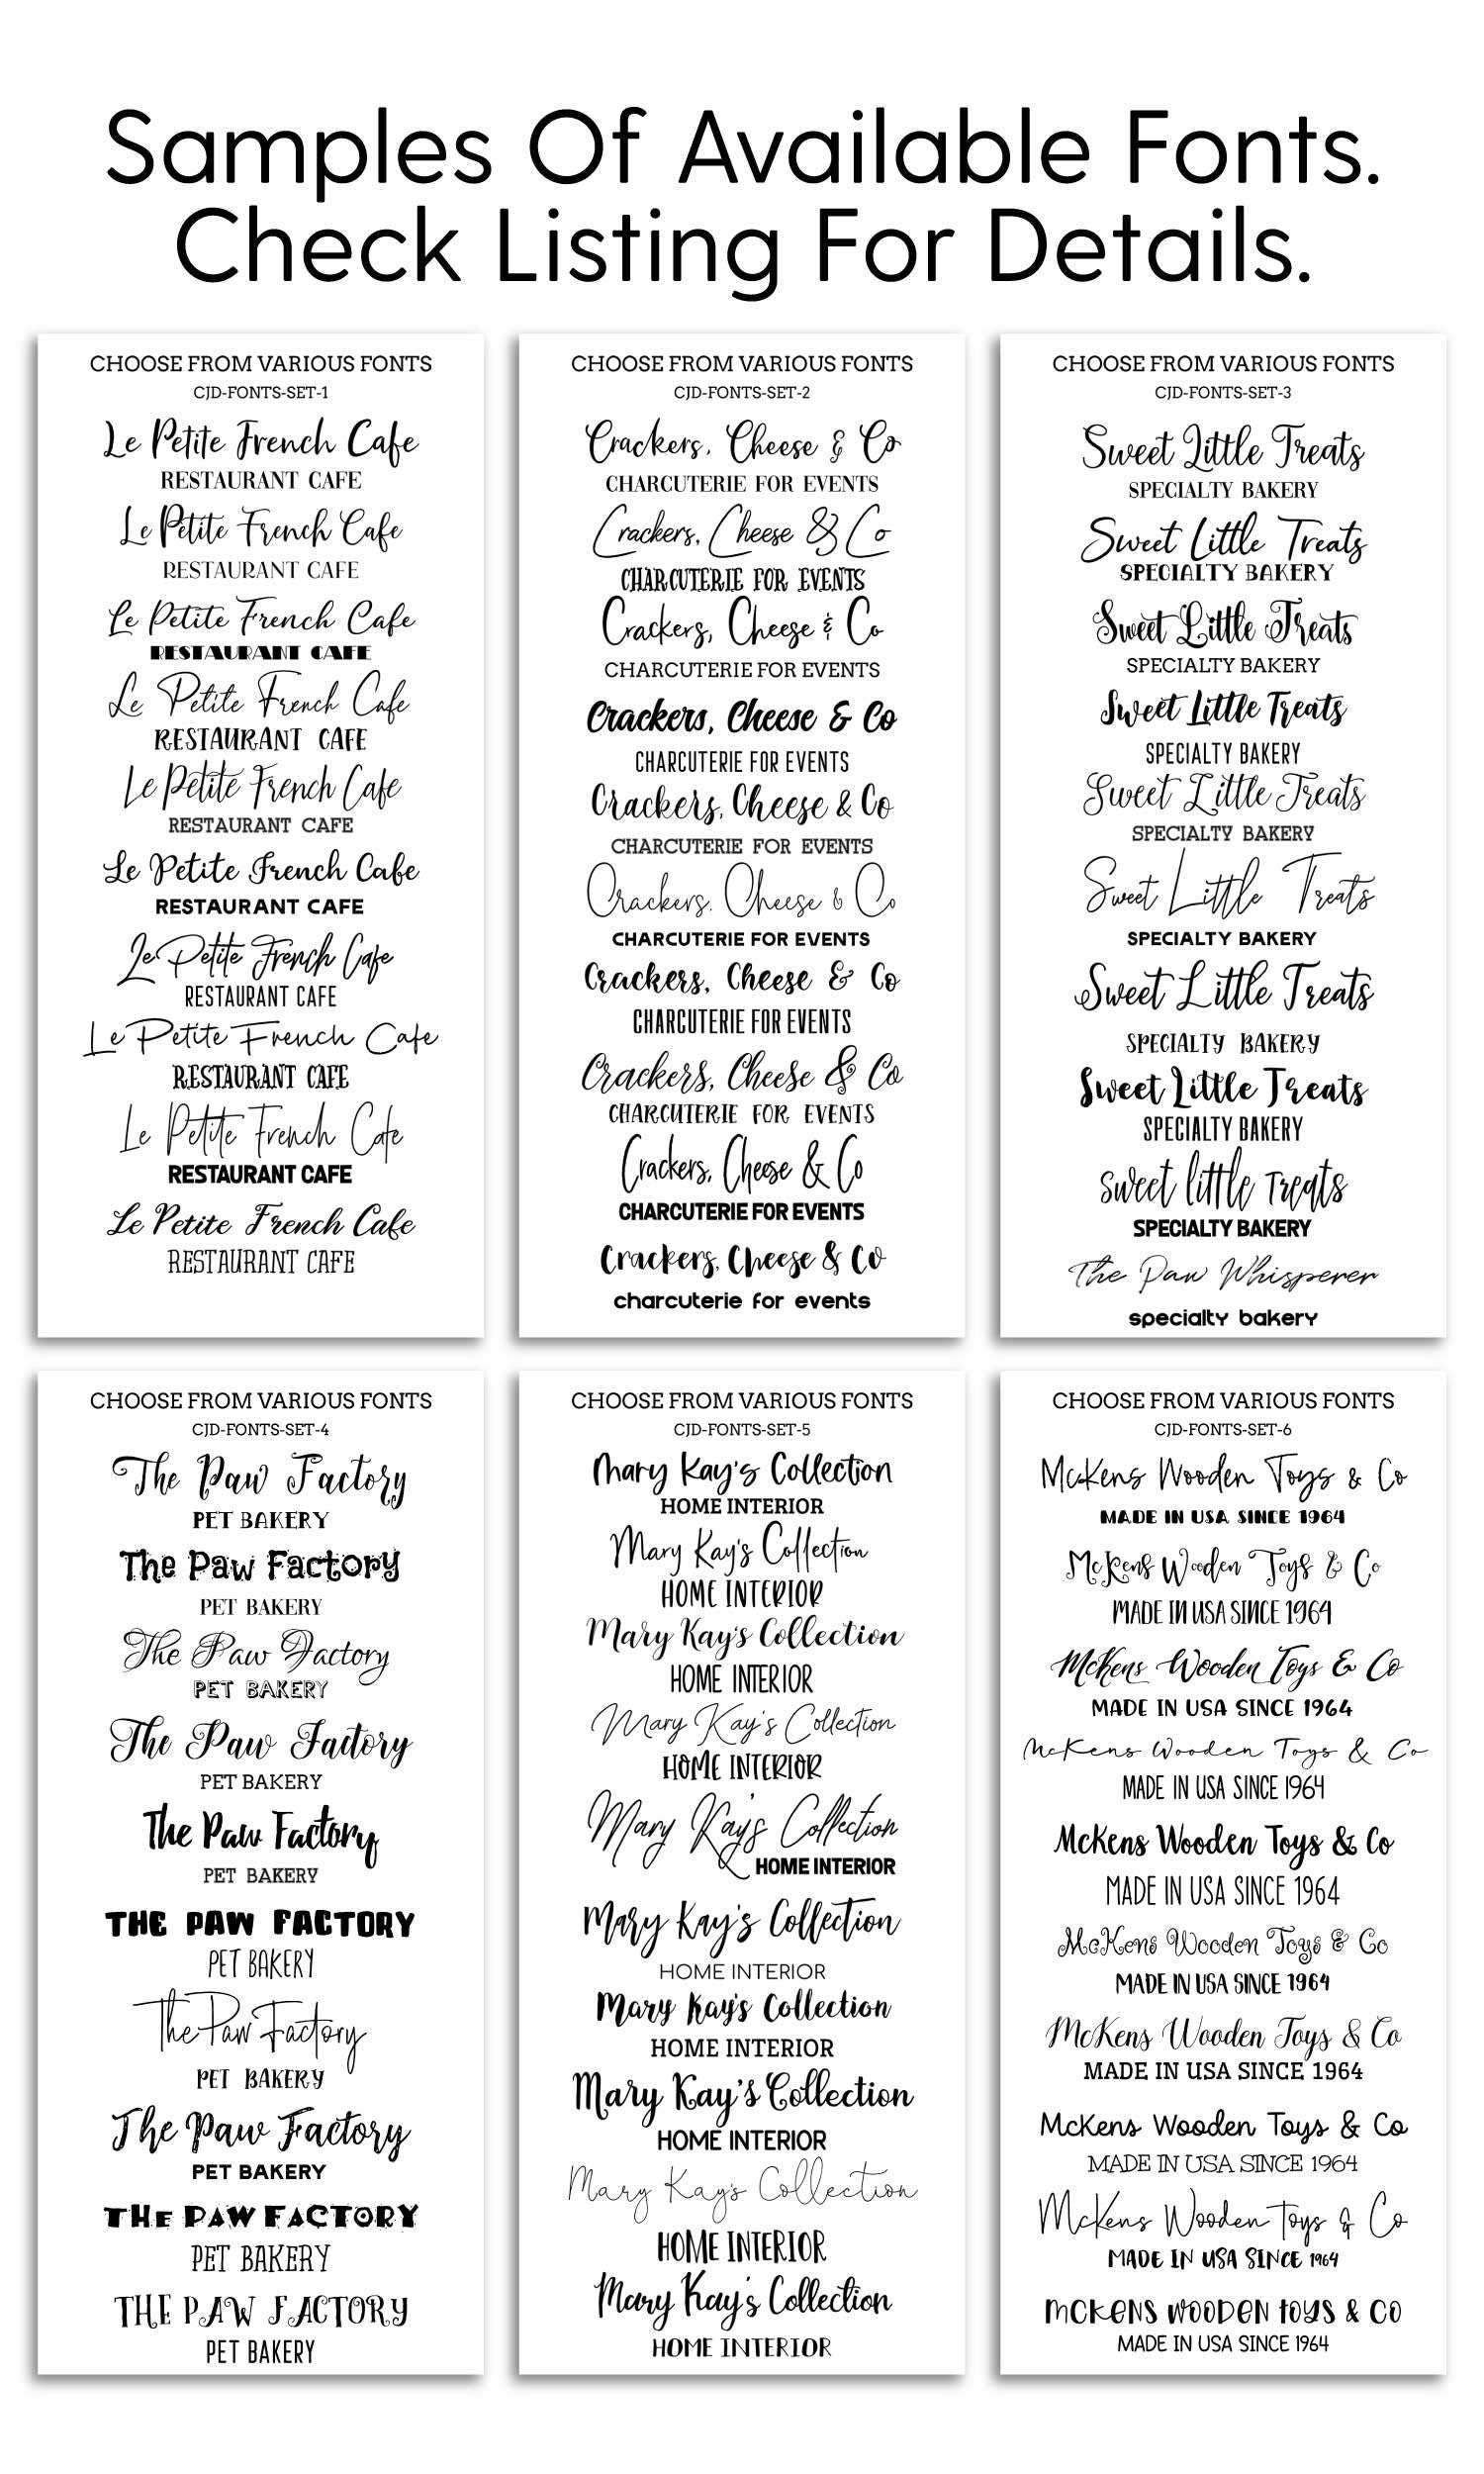 Catering Gift Coupons, Kitchen Stove - Candy Jar Studios